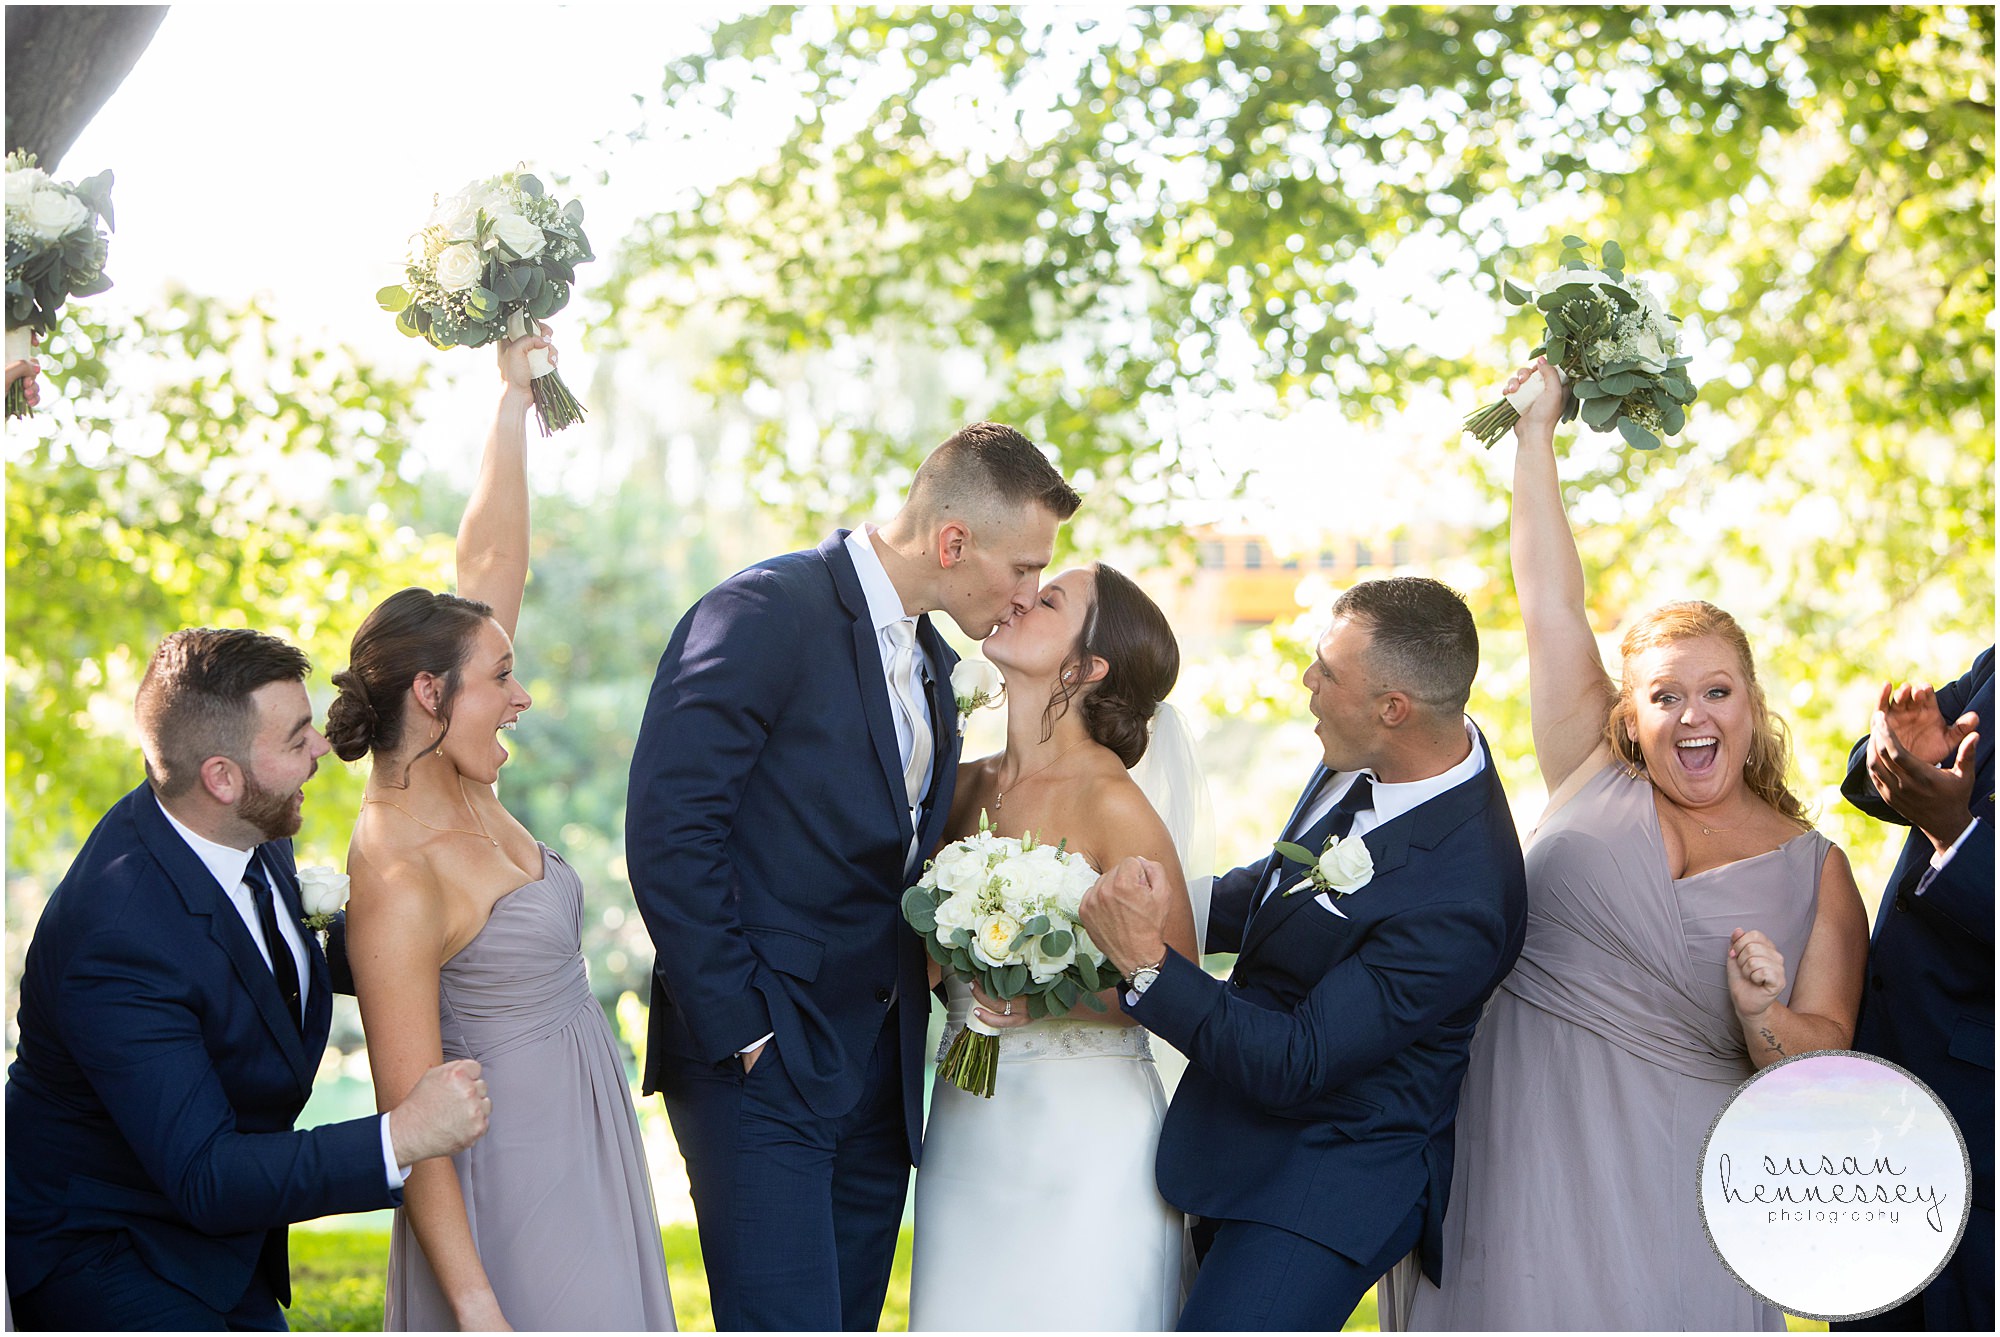 Bride and groom kiss with bridal party cheering them on!